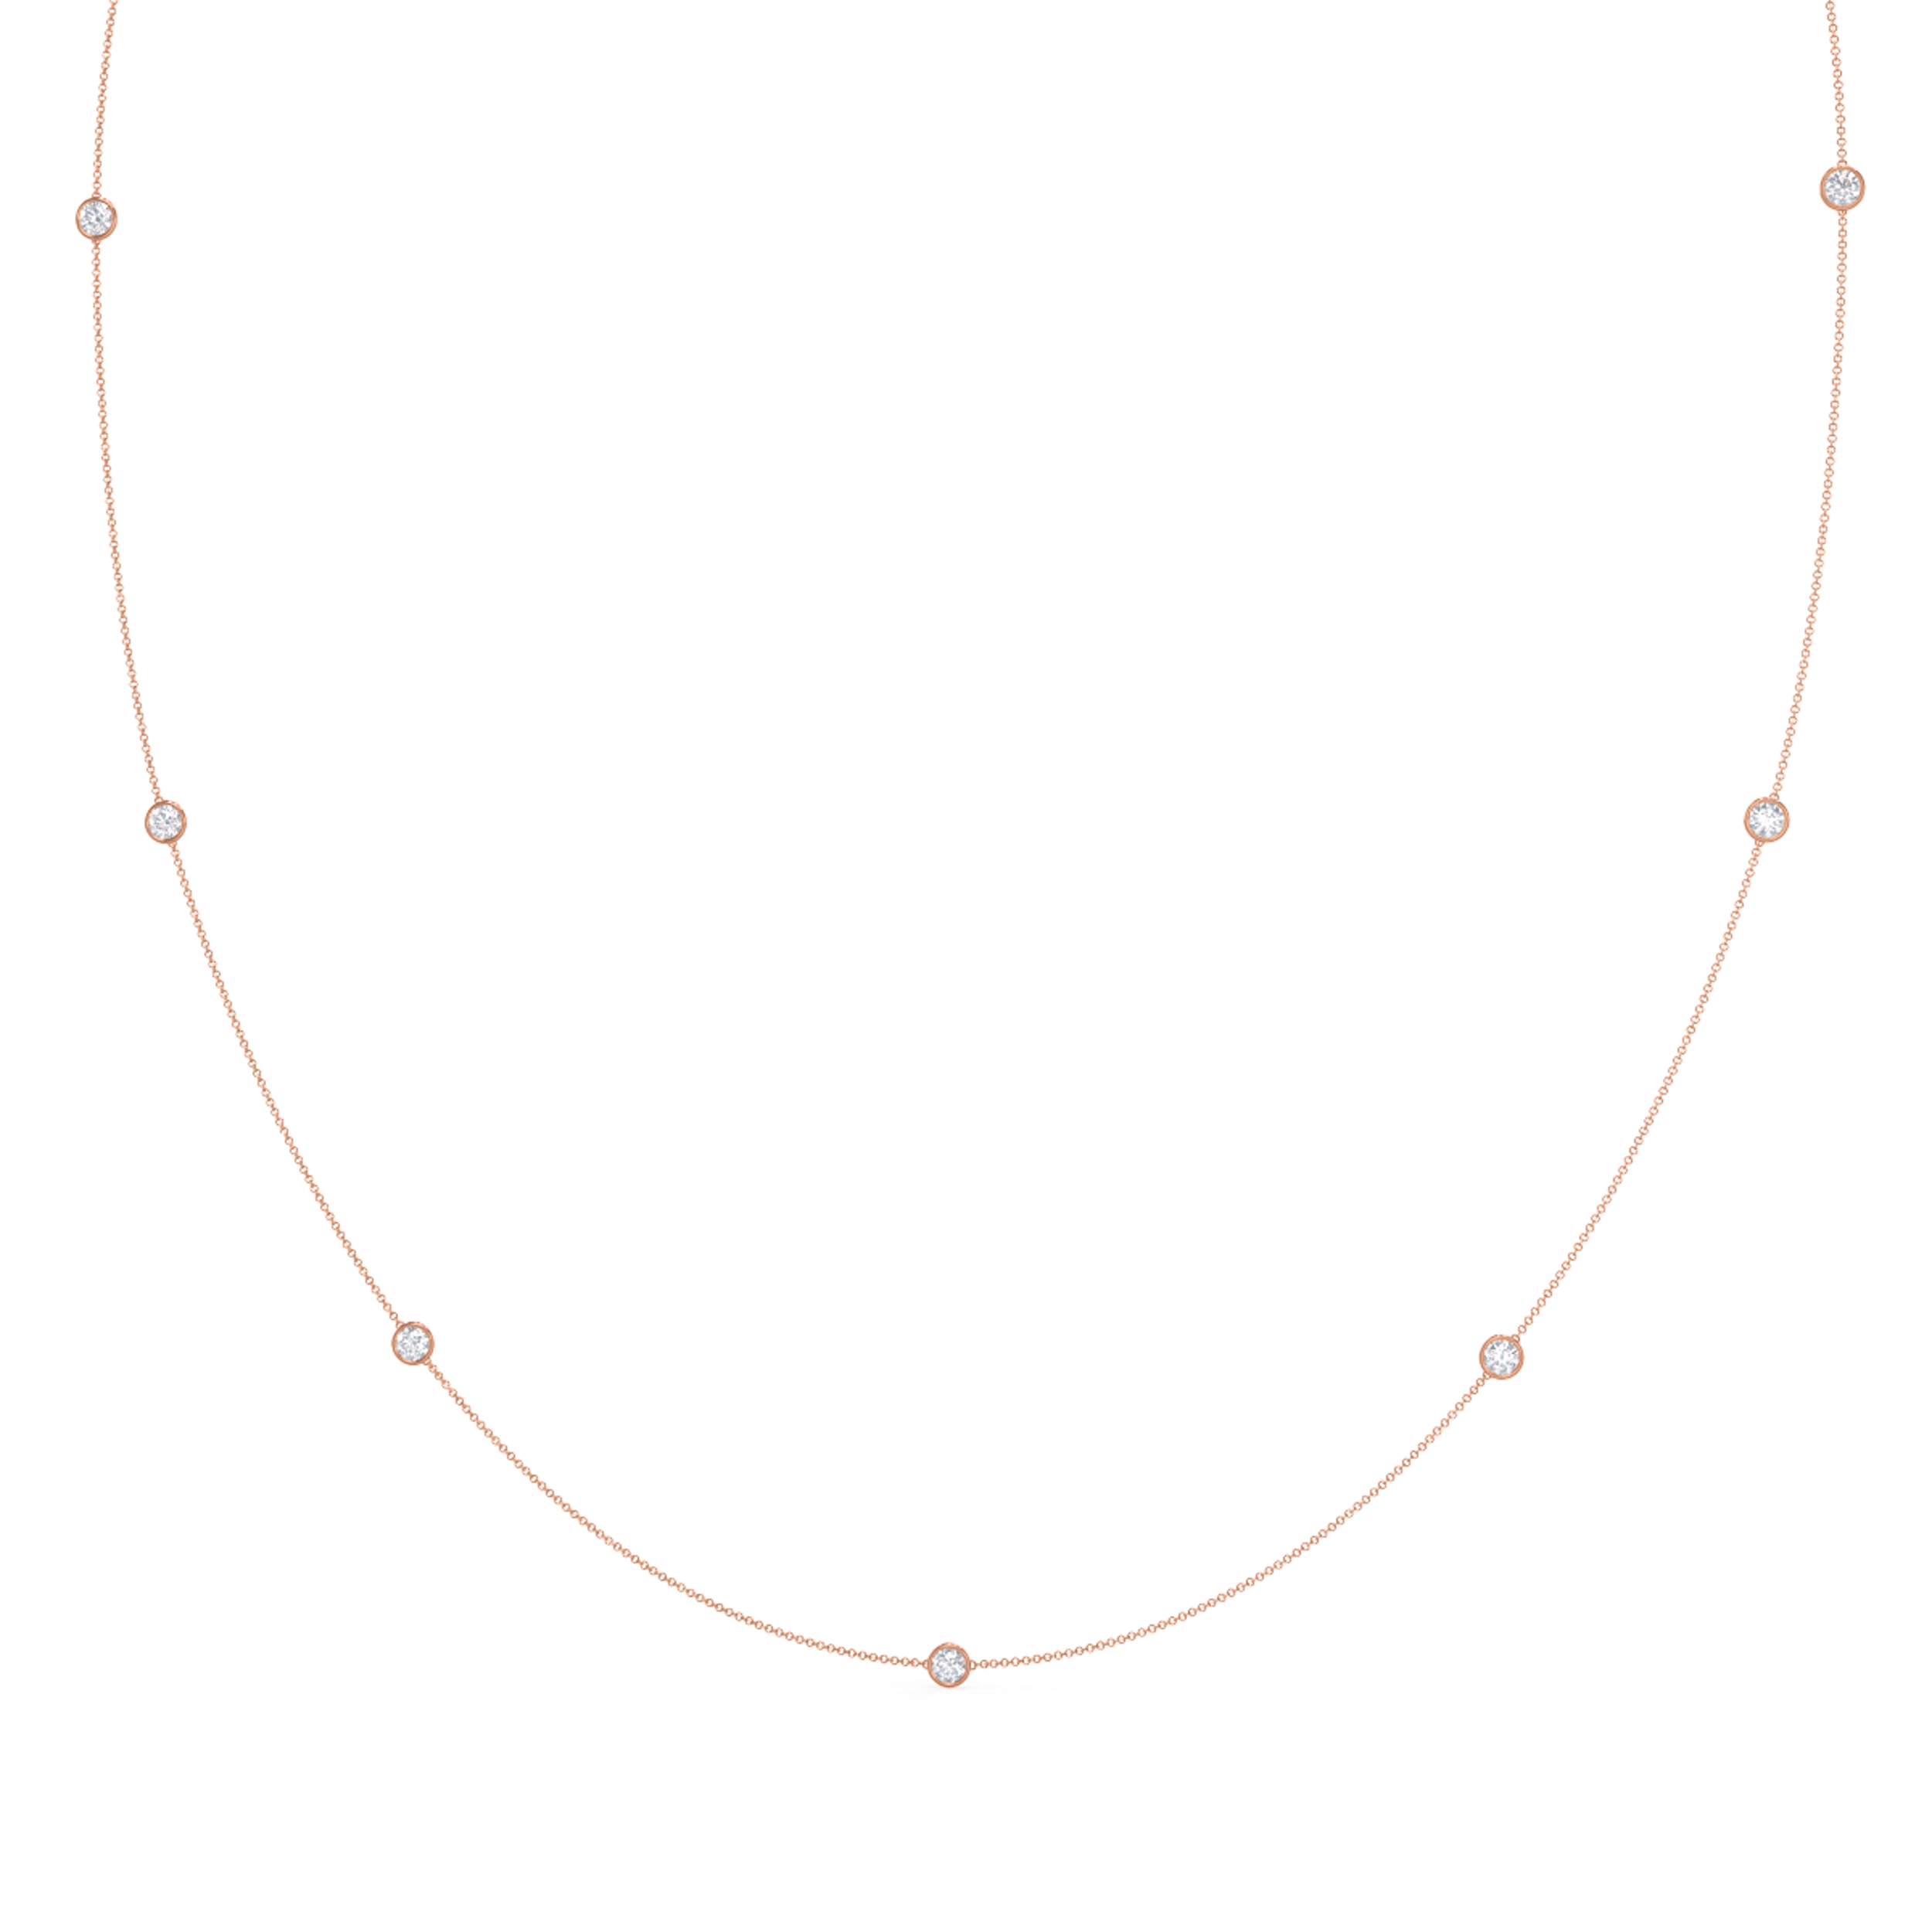 Seven bezel cosmopolitan necklace made in rose gold with lab created diamonds ADA Diamonds designs ad 228